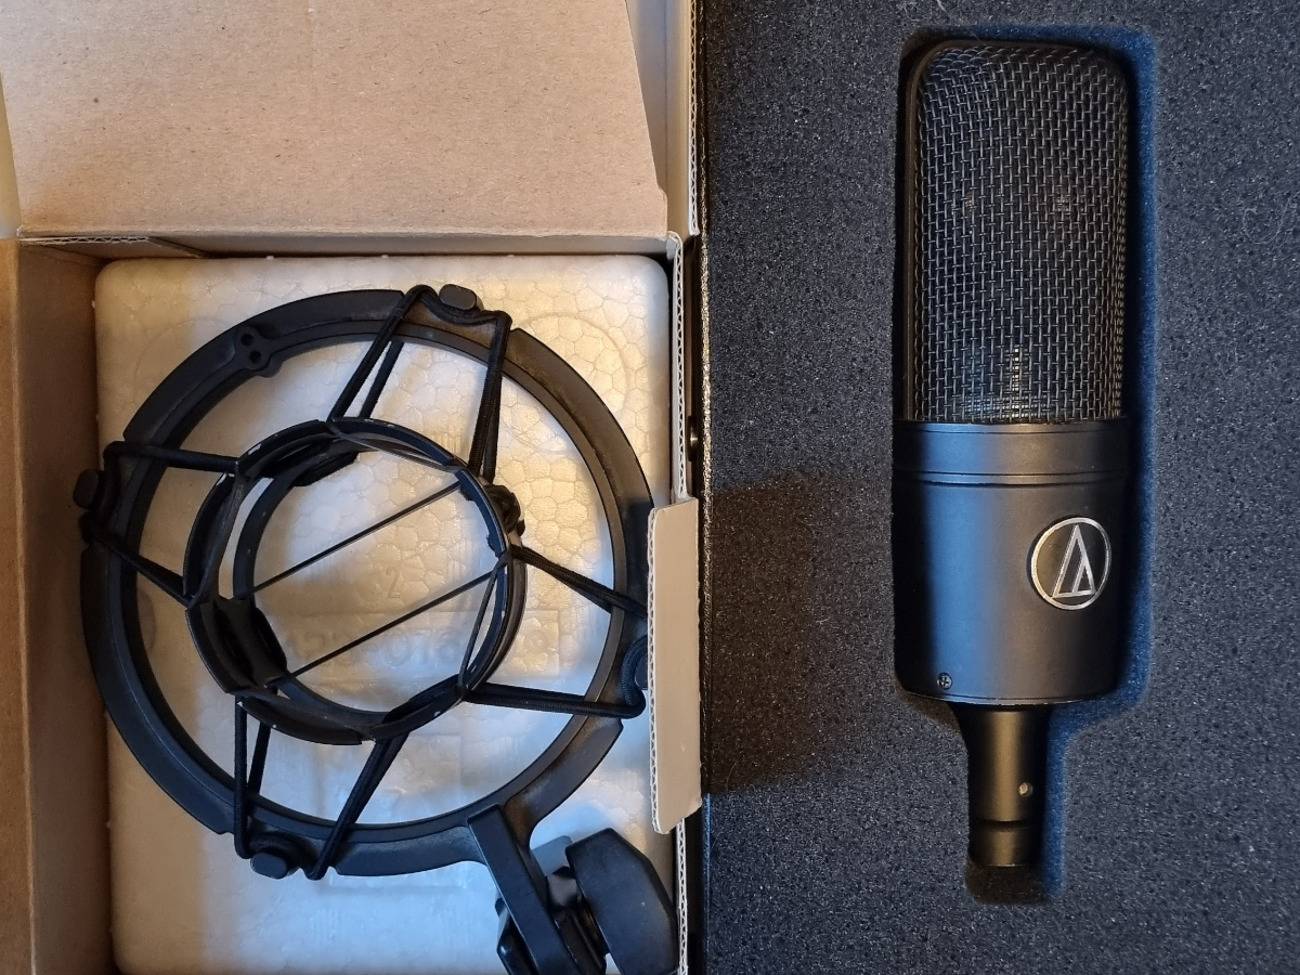 Easy Setup with Audio-technica AT4040